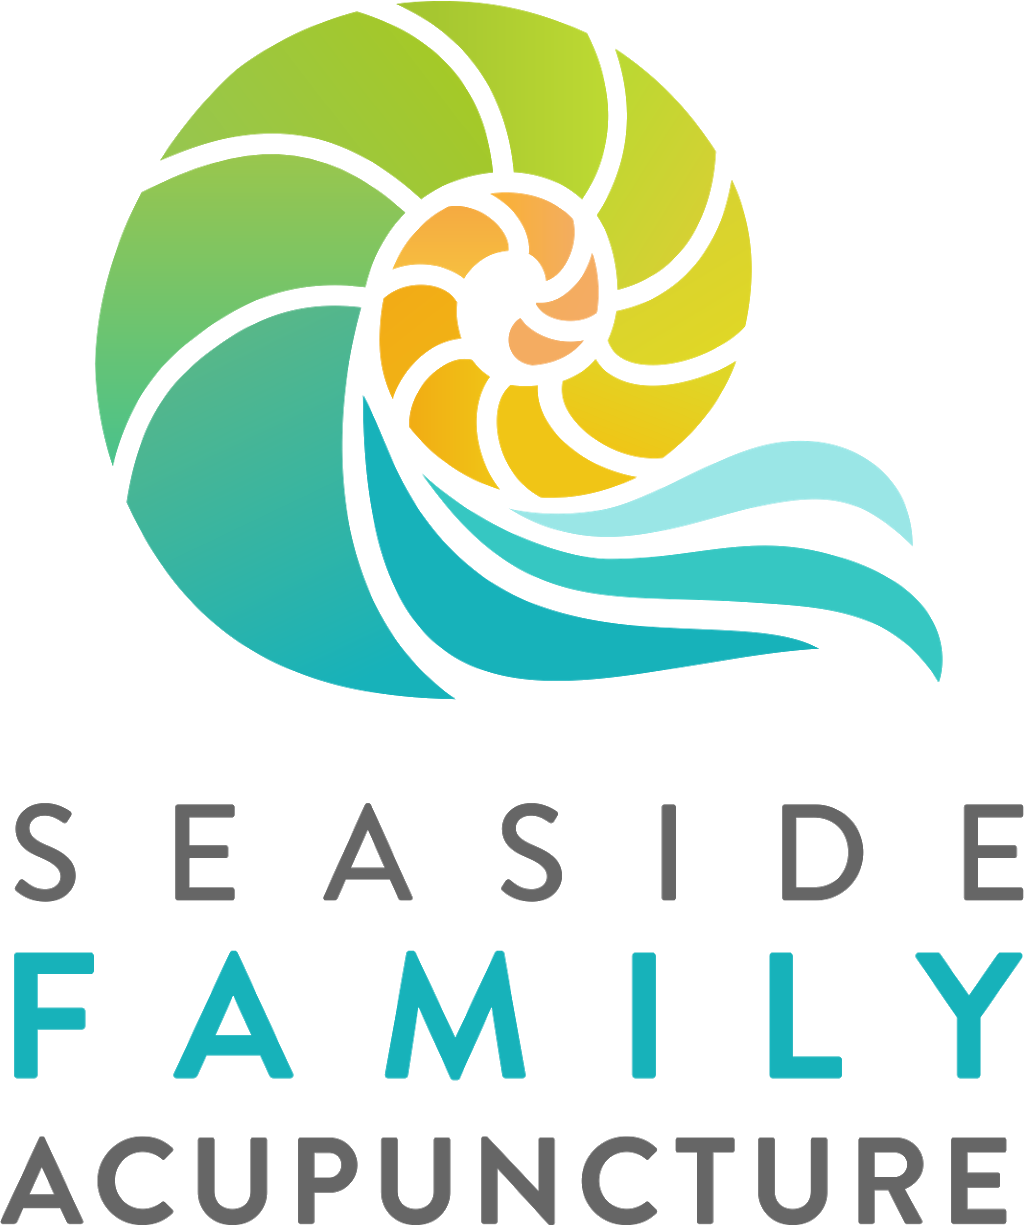 Seaside Family Acupuncture | 564 Loring Ave Suite 2, Salem, MA 01970 | Phone: (781) 484-0077